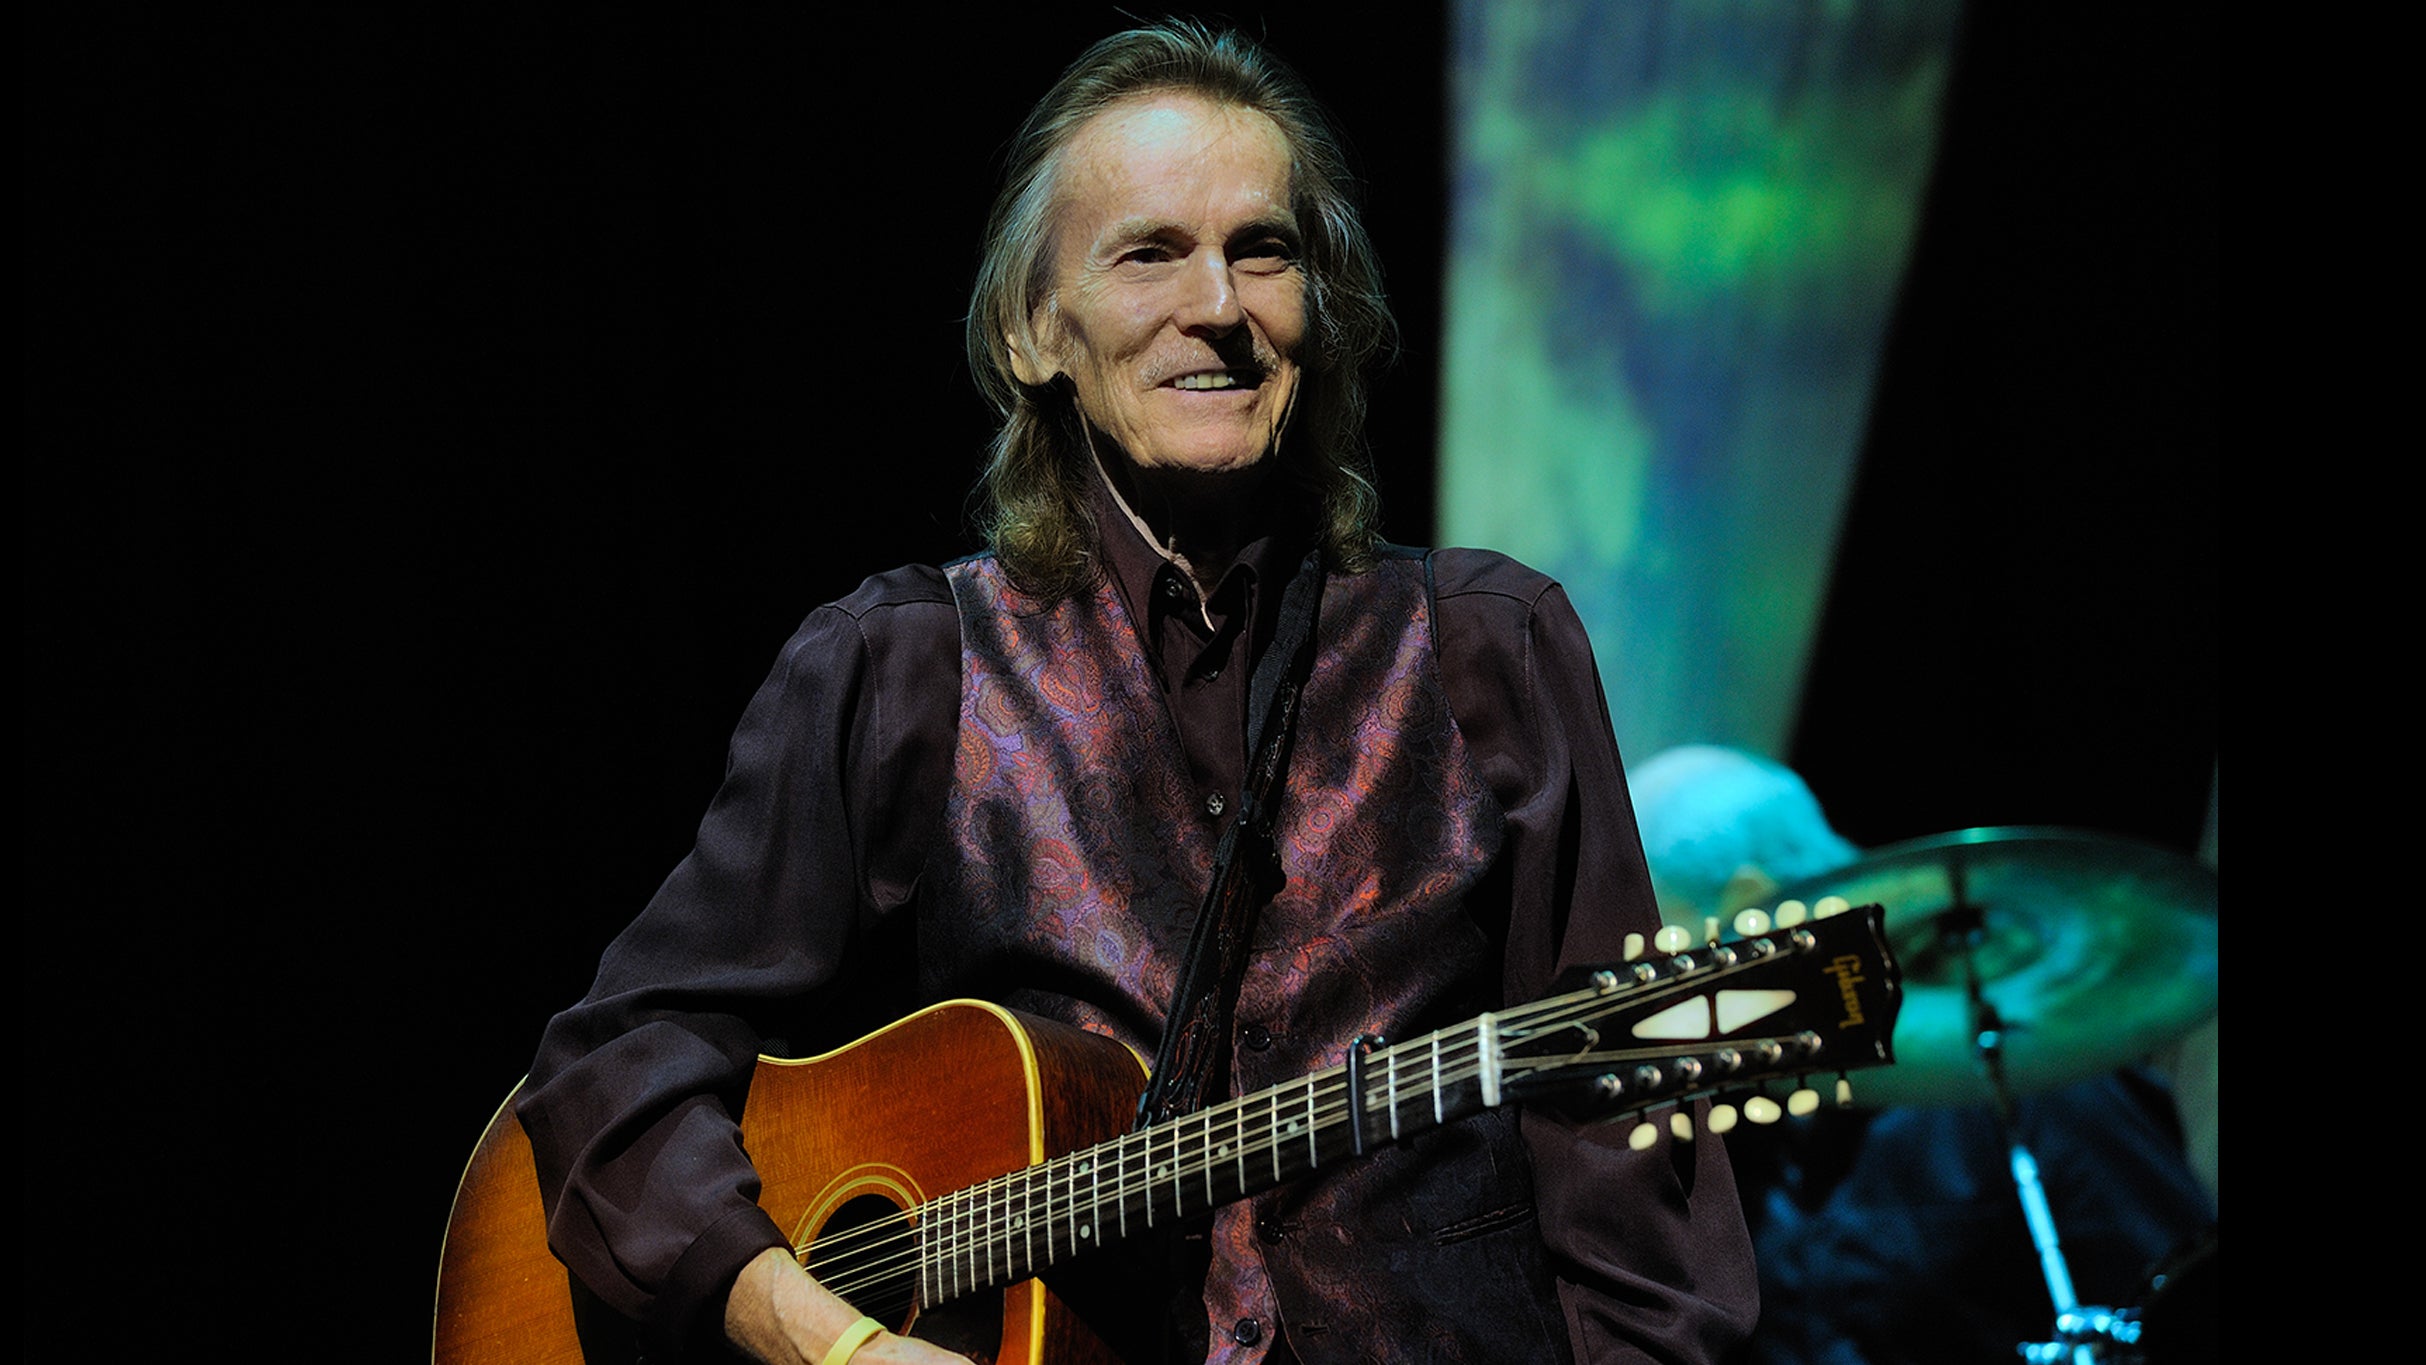 Gordon Lightfoot: The Legend In Concert pre-sale password for early tickets in Peoria